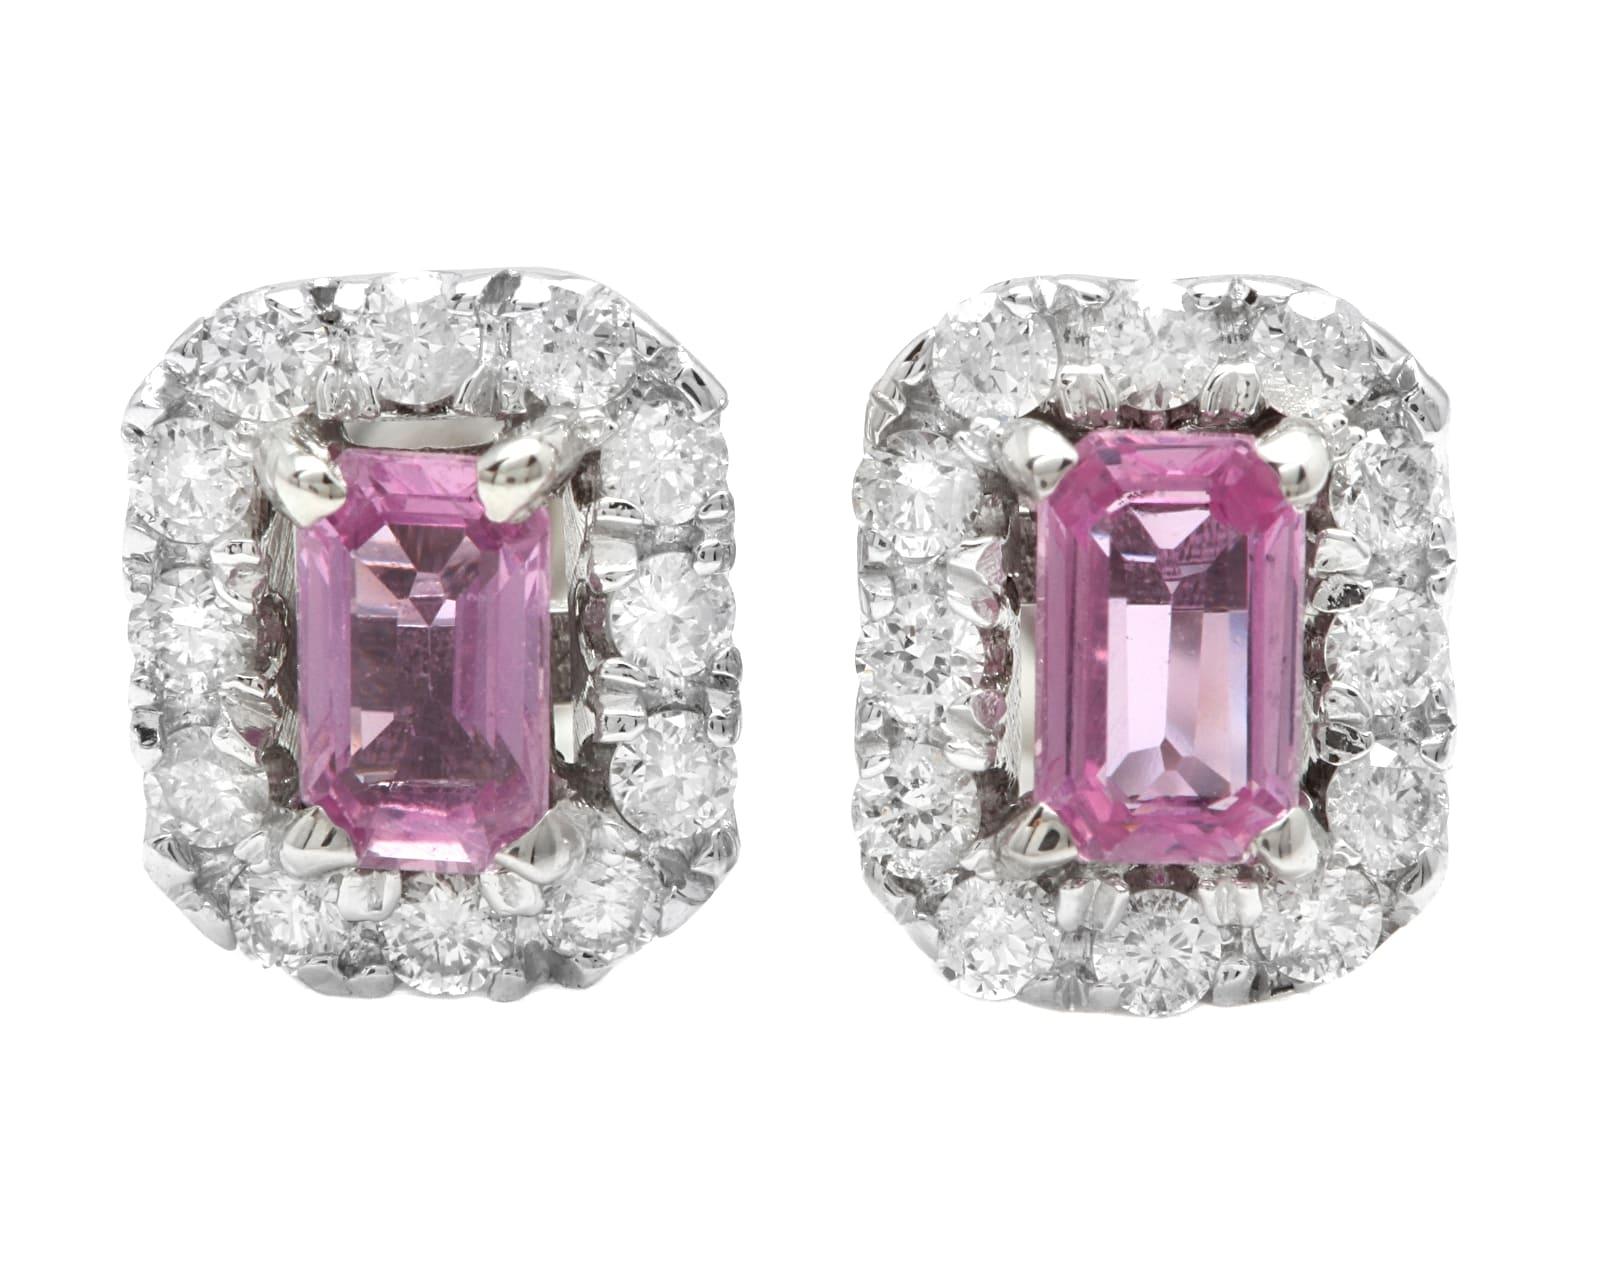 1.05 Carats Natural Pink Sapphire and Diamond 14K Solid White Gold Earrings

Amazing looking piece! 

Suggested Replacement Value: Approx. $5,500.00 

Total Natural Round Cut White Diamonds Weight: Approx. 0.40 Carats (color G-H / Clarity